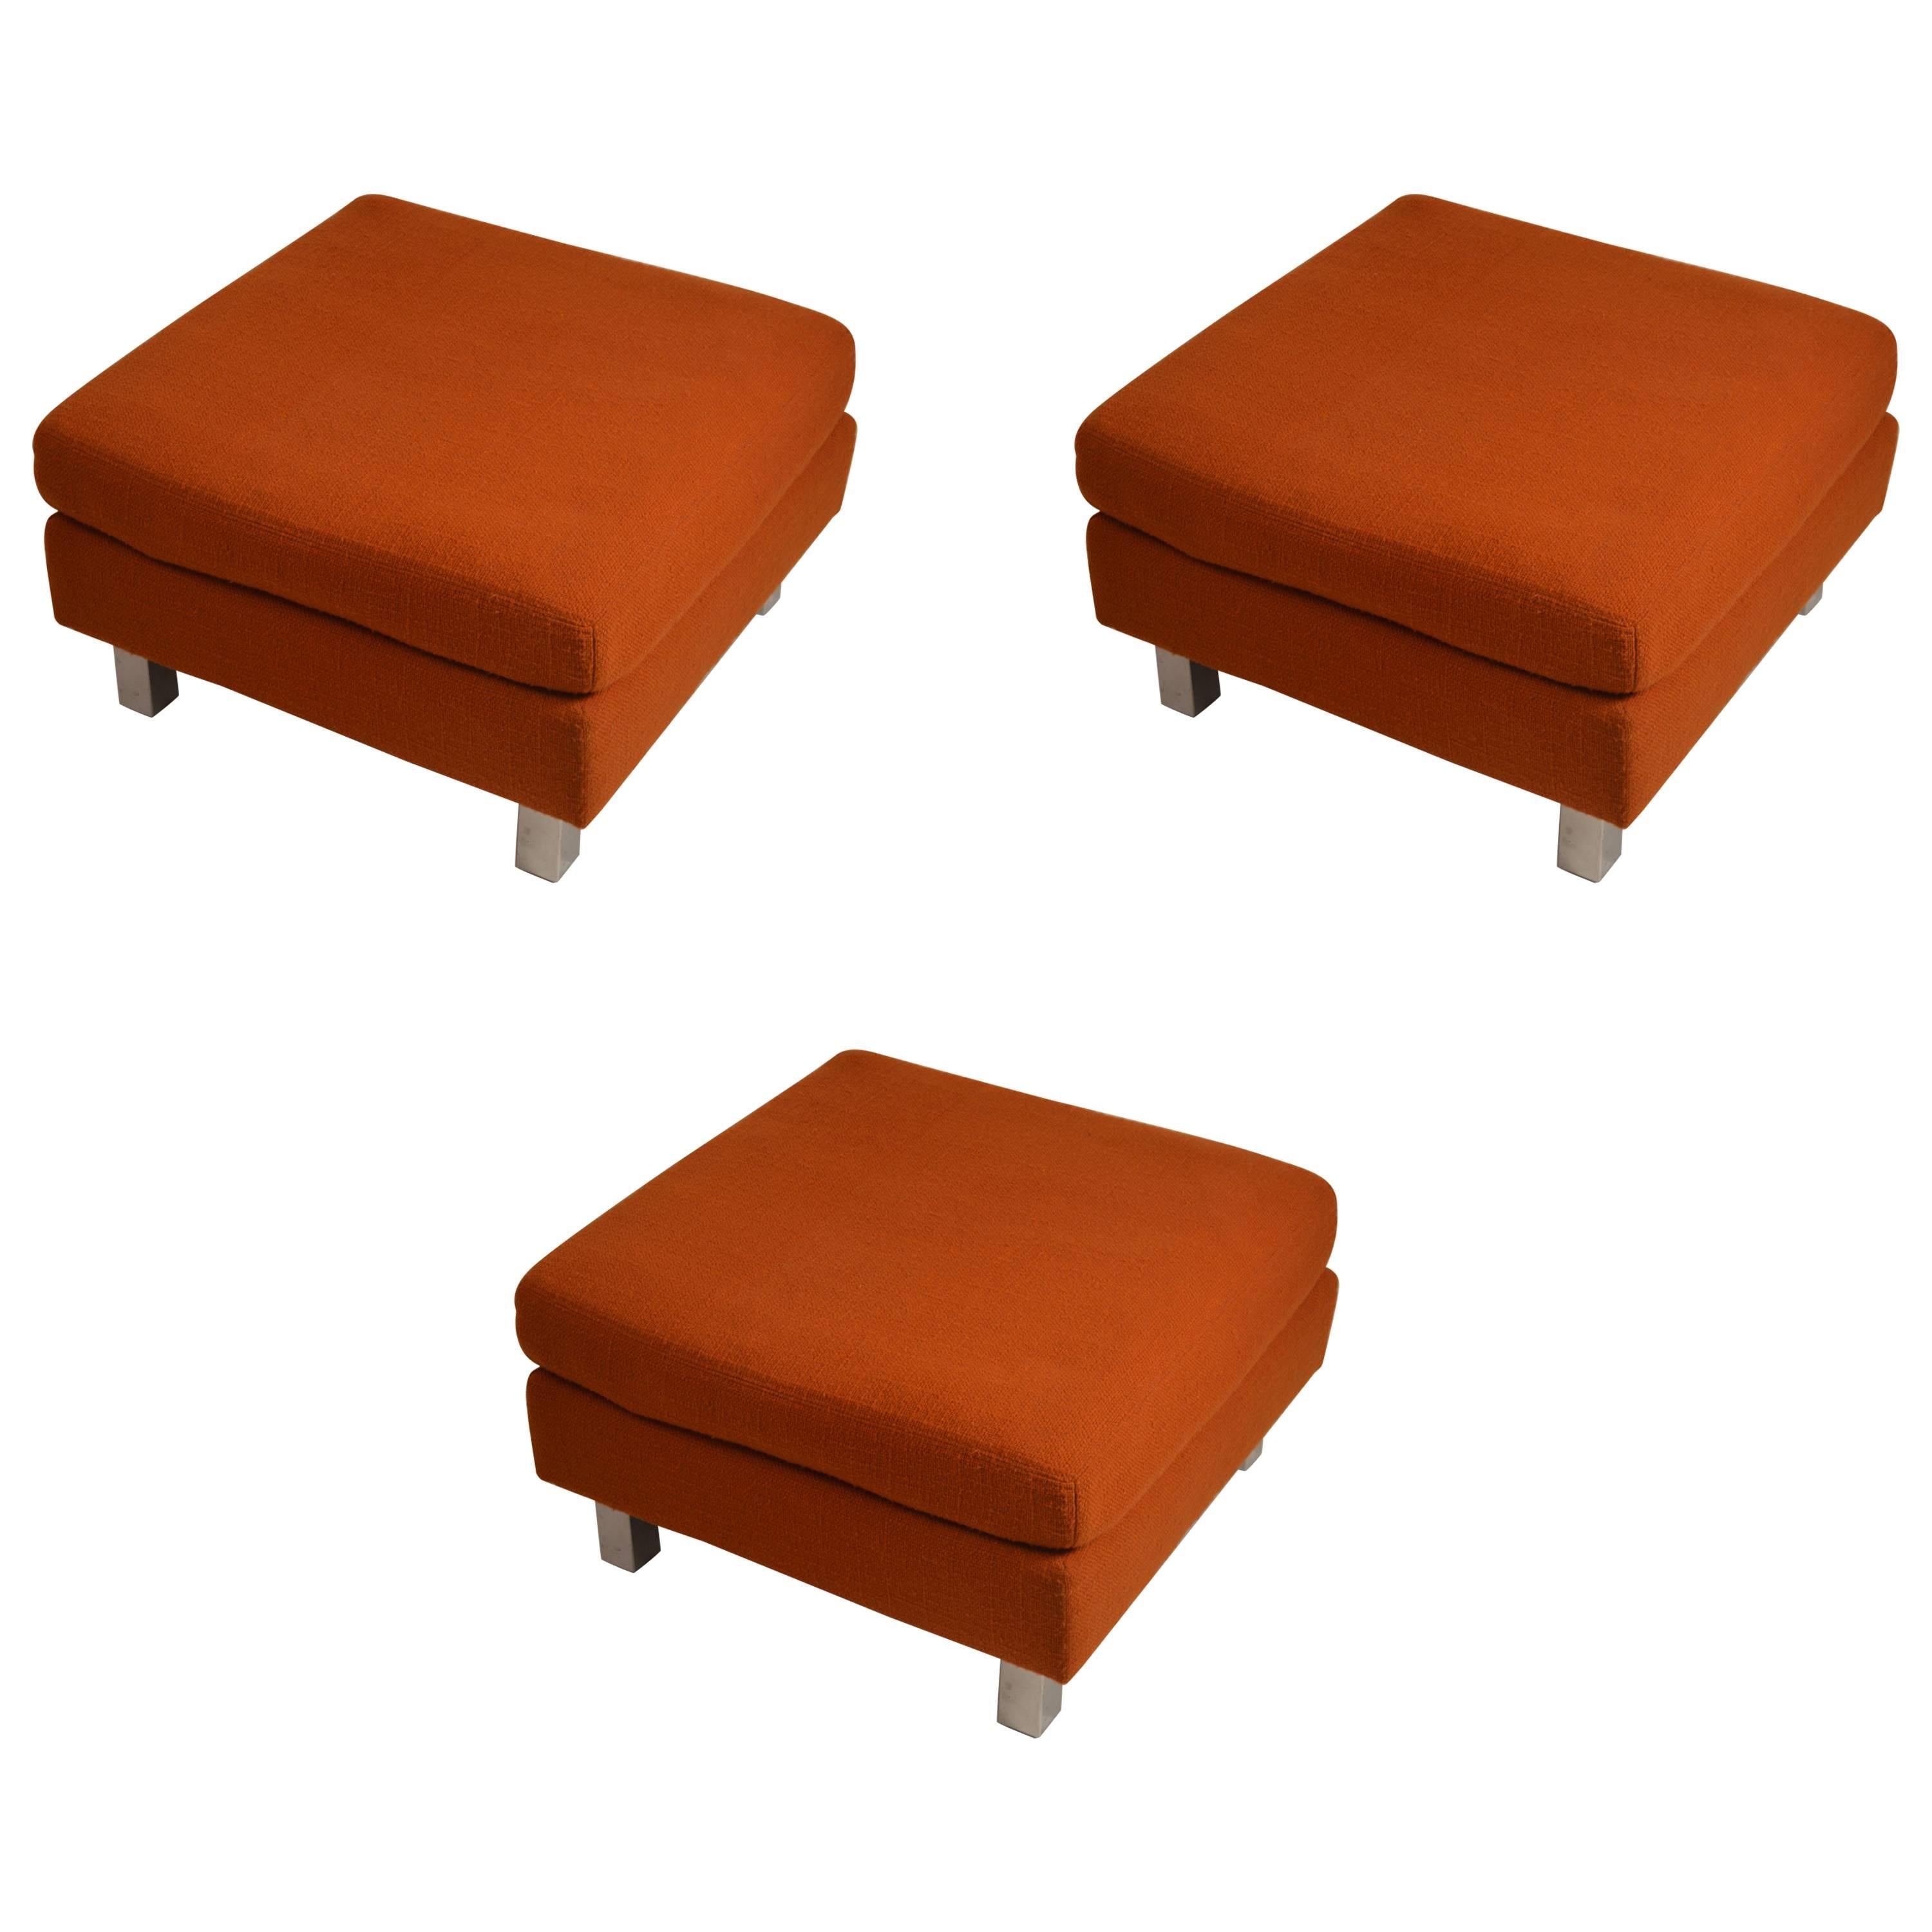 Set of Three "Contempo" Ottomans, Benches, Footrests, Poufs